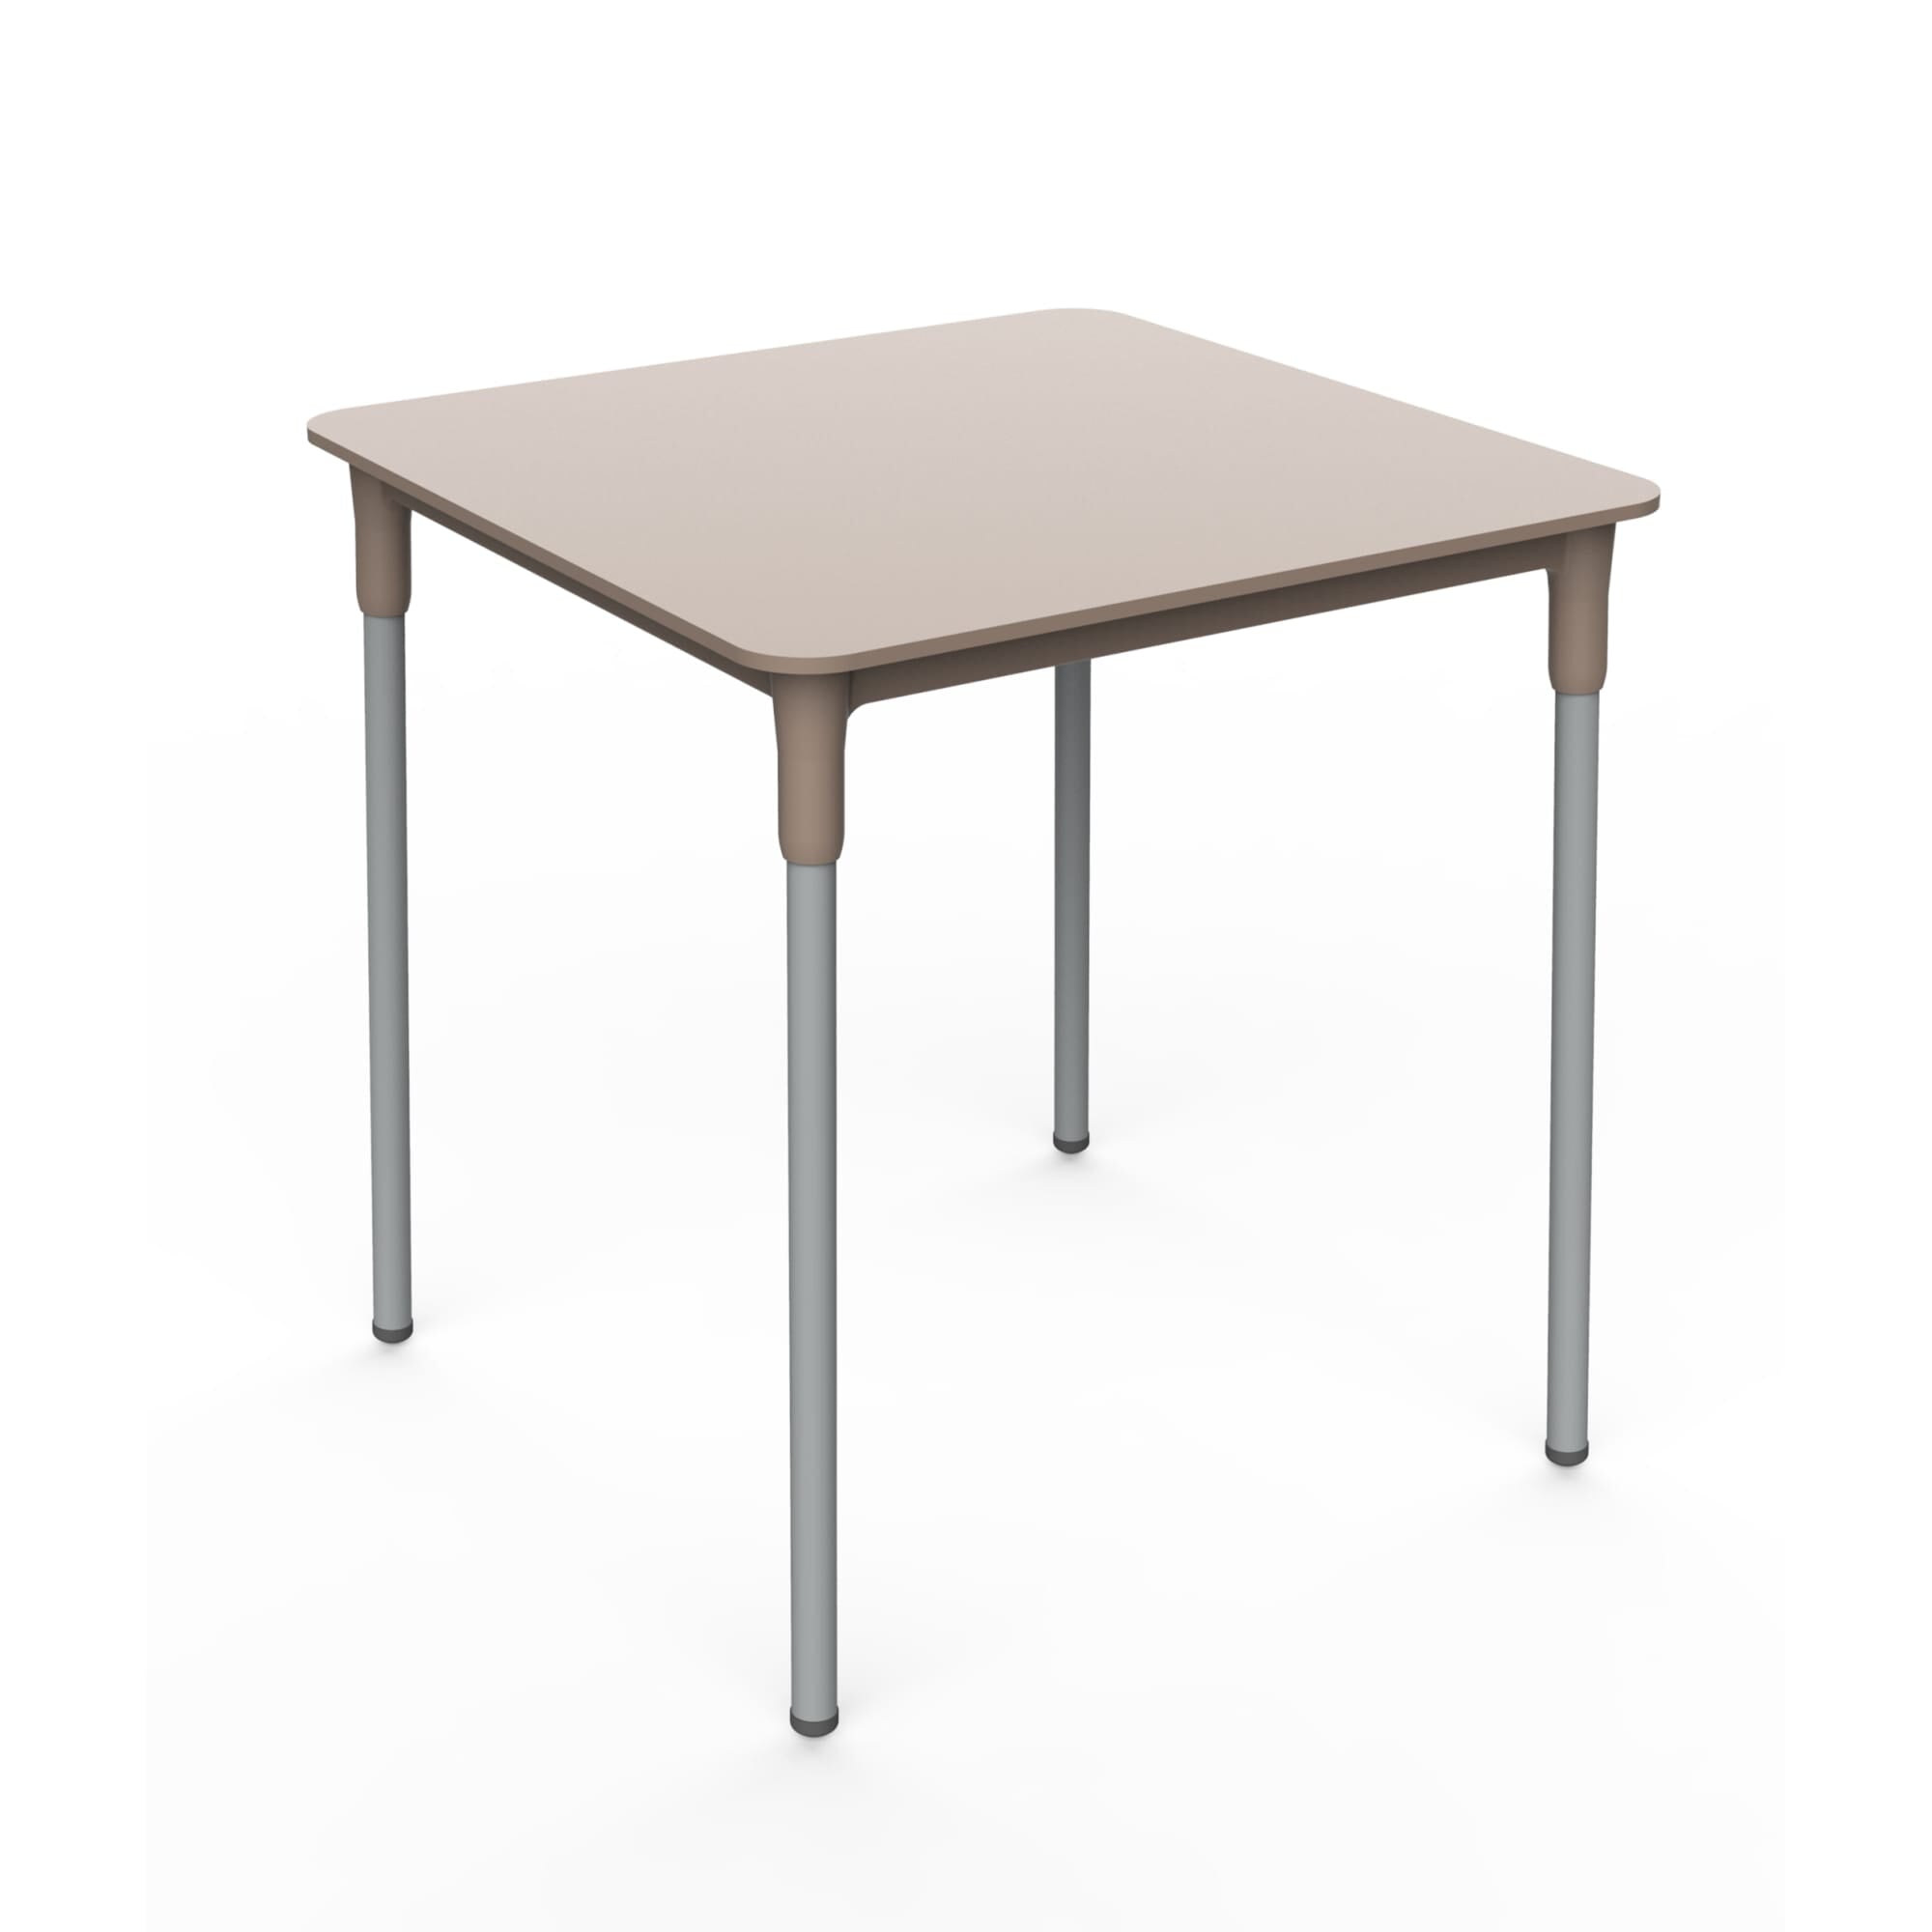 Garbar Zürich square table indoors, outdoors 70x70 sand